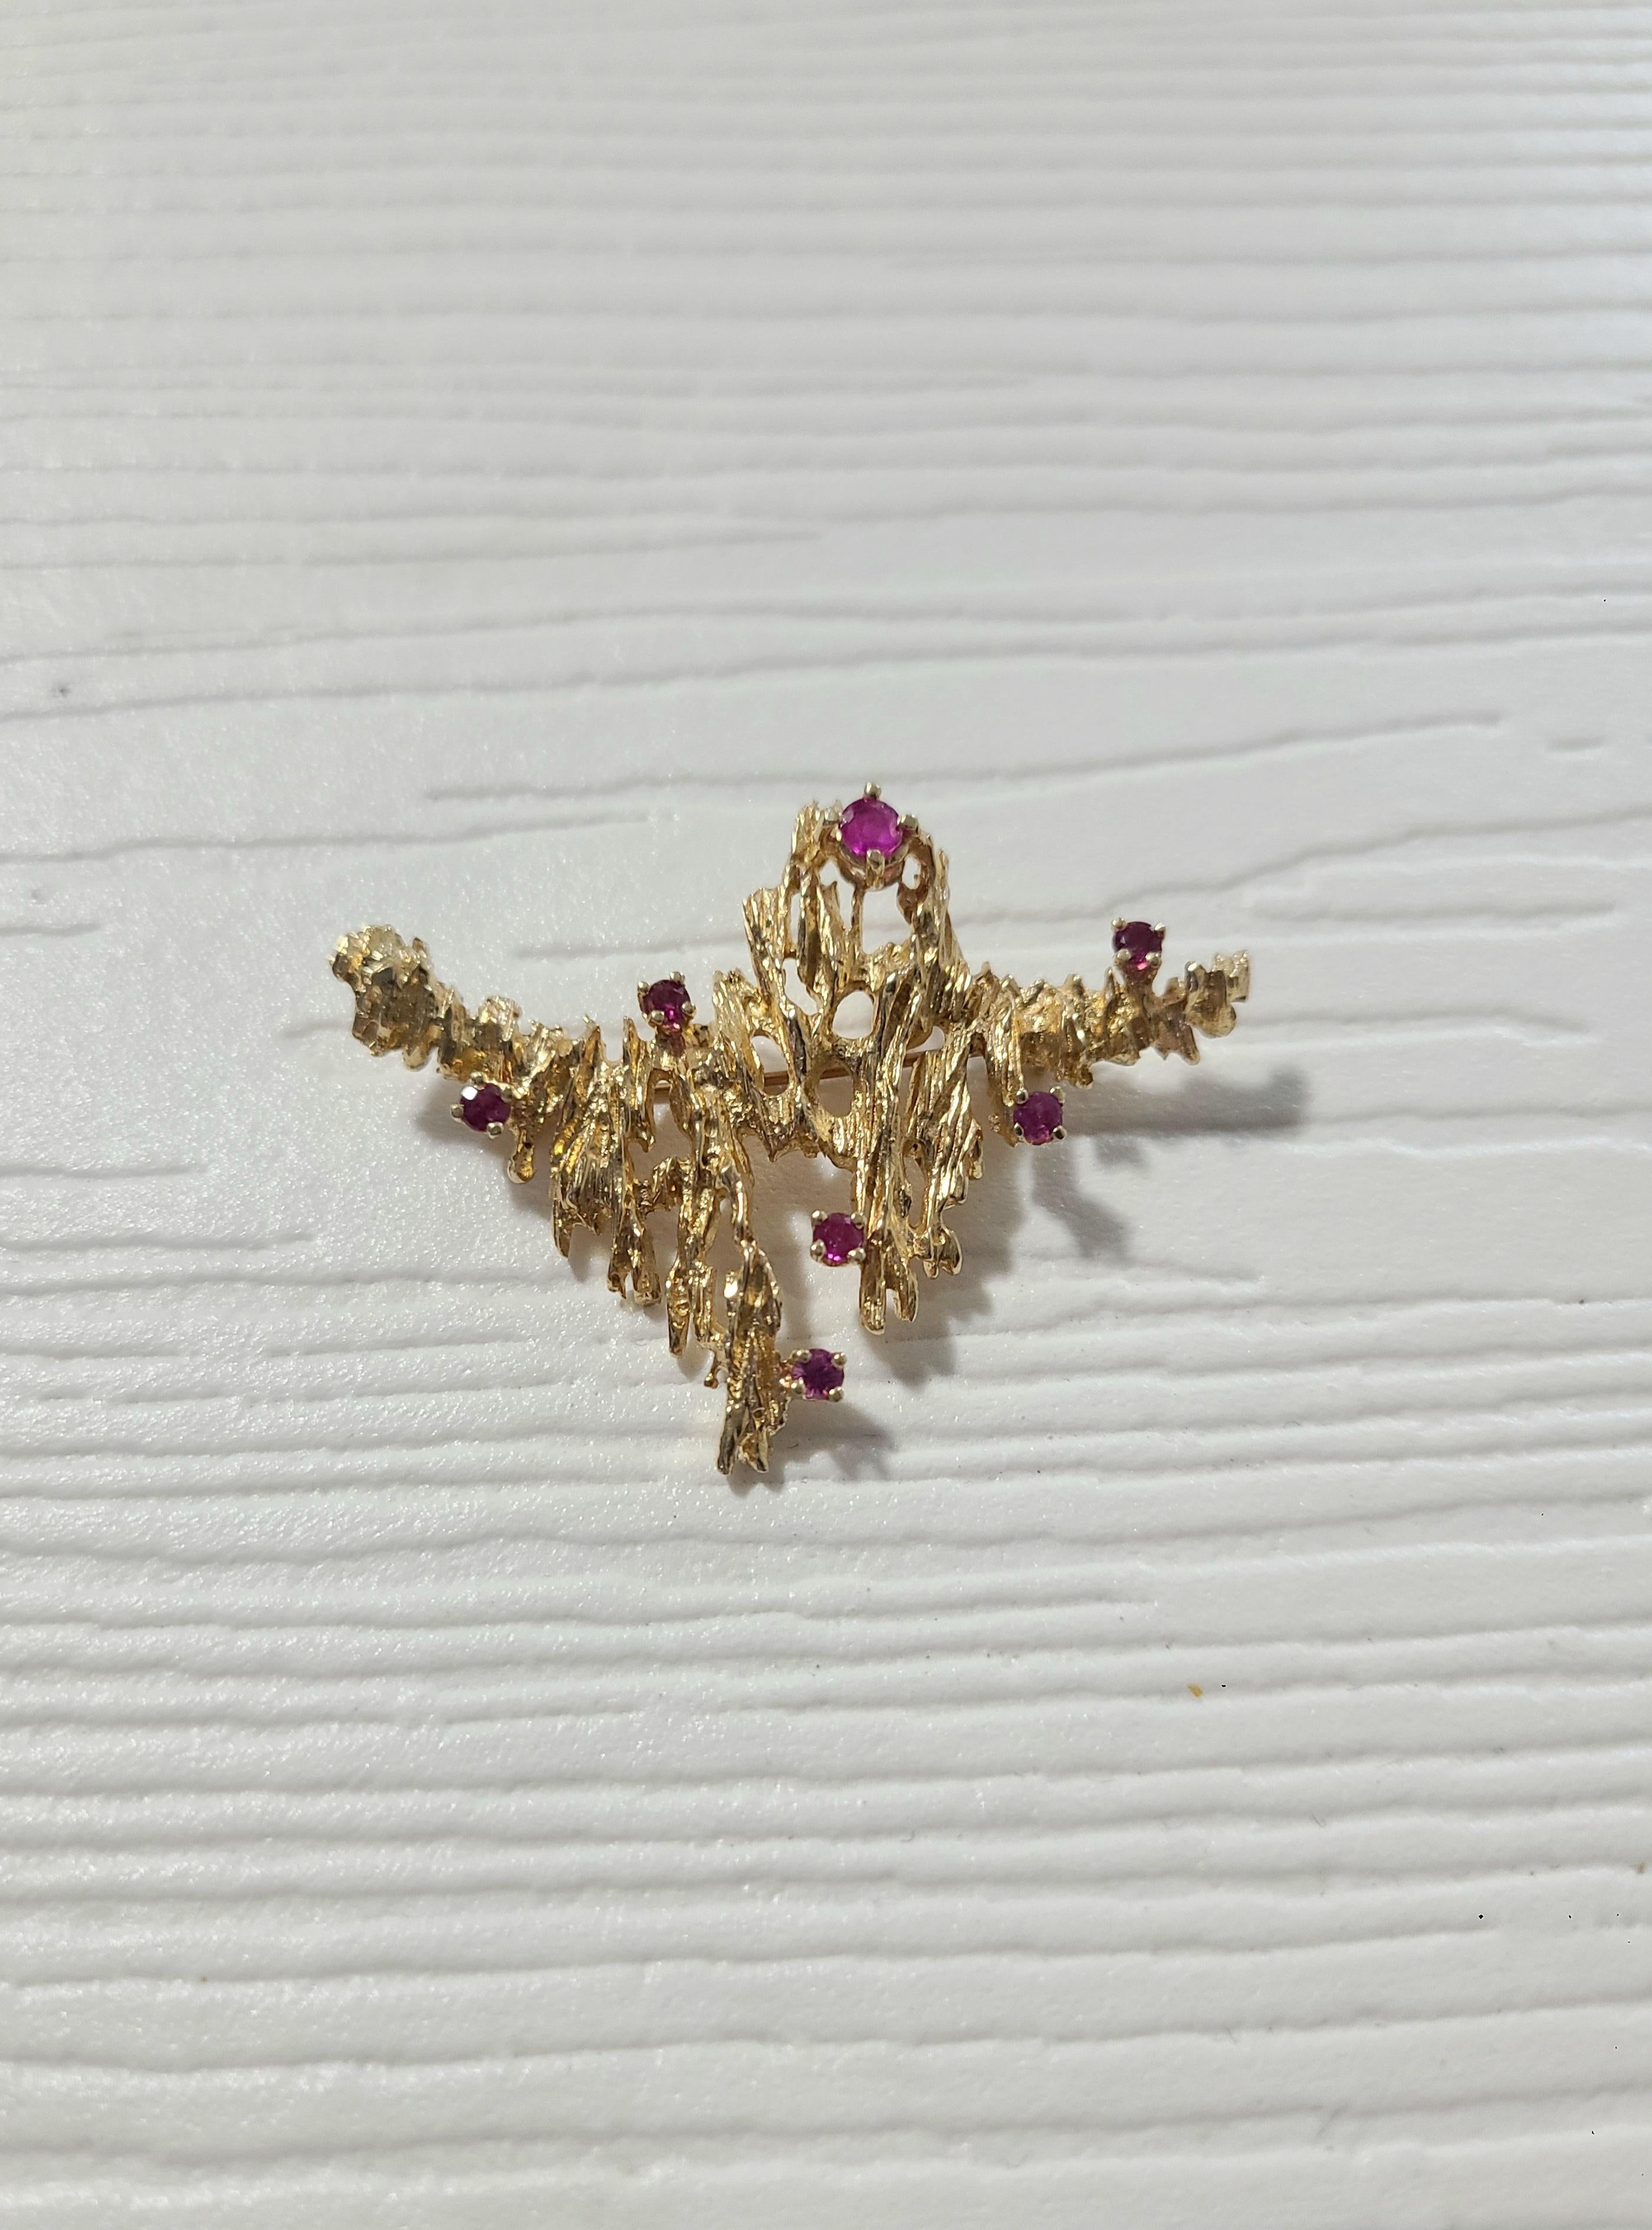 Bruatlist jewelery design is fully embodied in this 14k gold and ruby brooch, meticulously crafted by Walter Schleup in his Montreal studio. 

